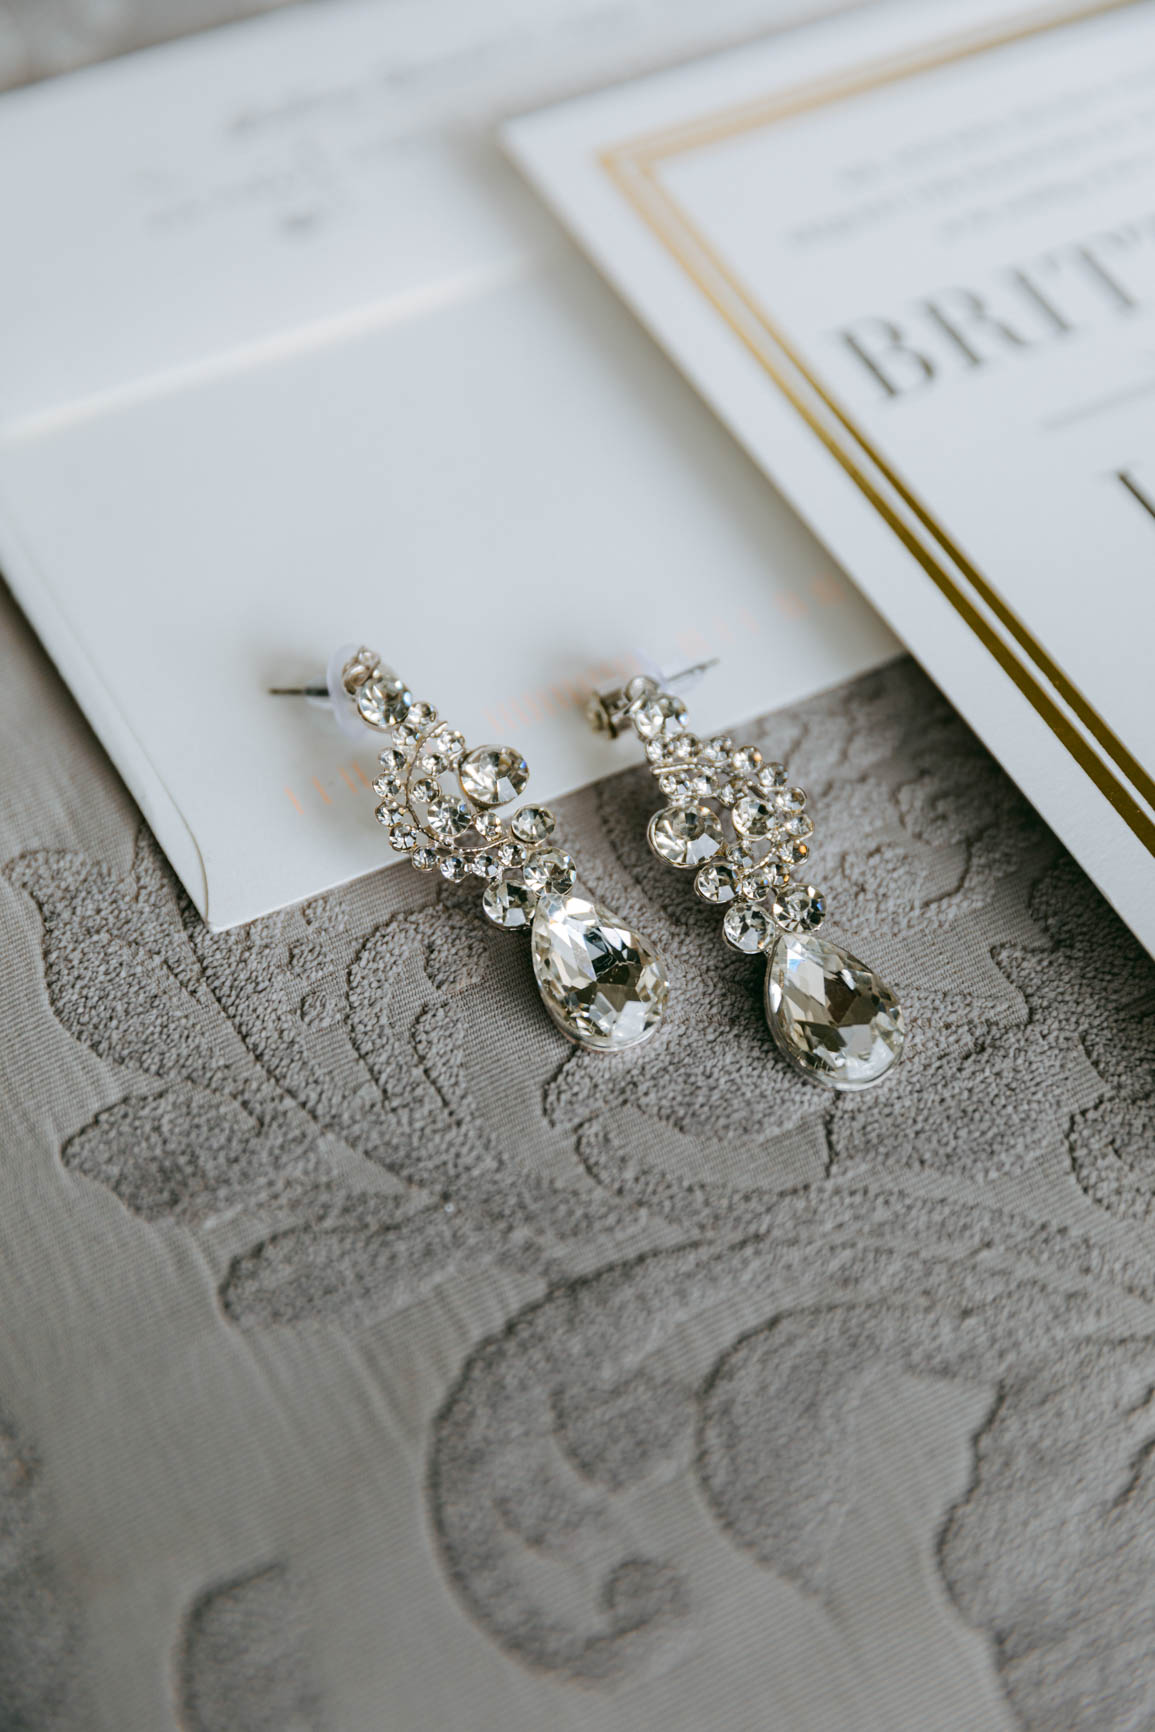 wedding jewelry at Separk Mansion in Gastonia NC shot by Nhieu Tang Photography | nhieutang.com